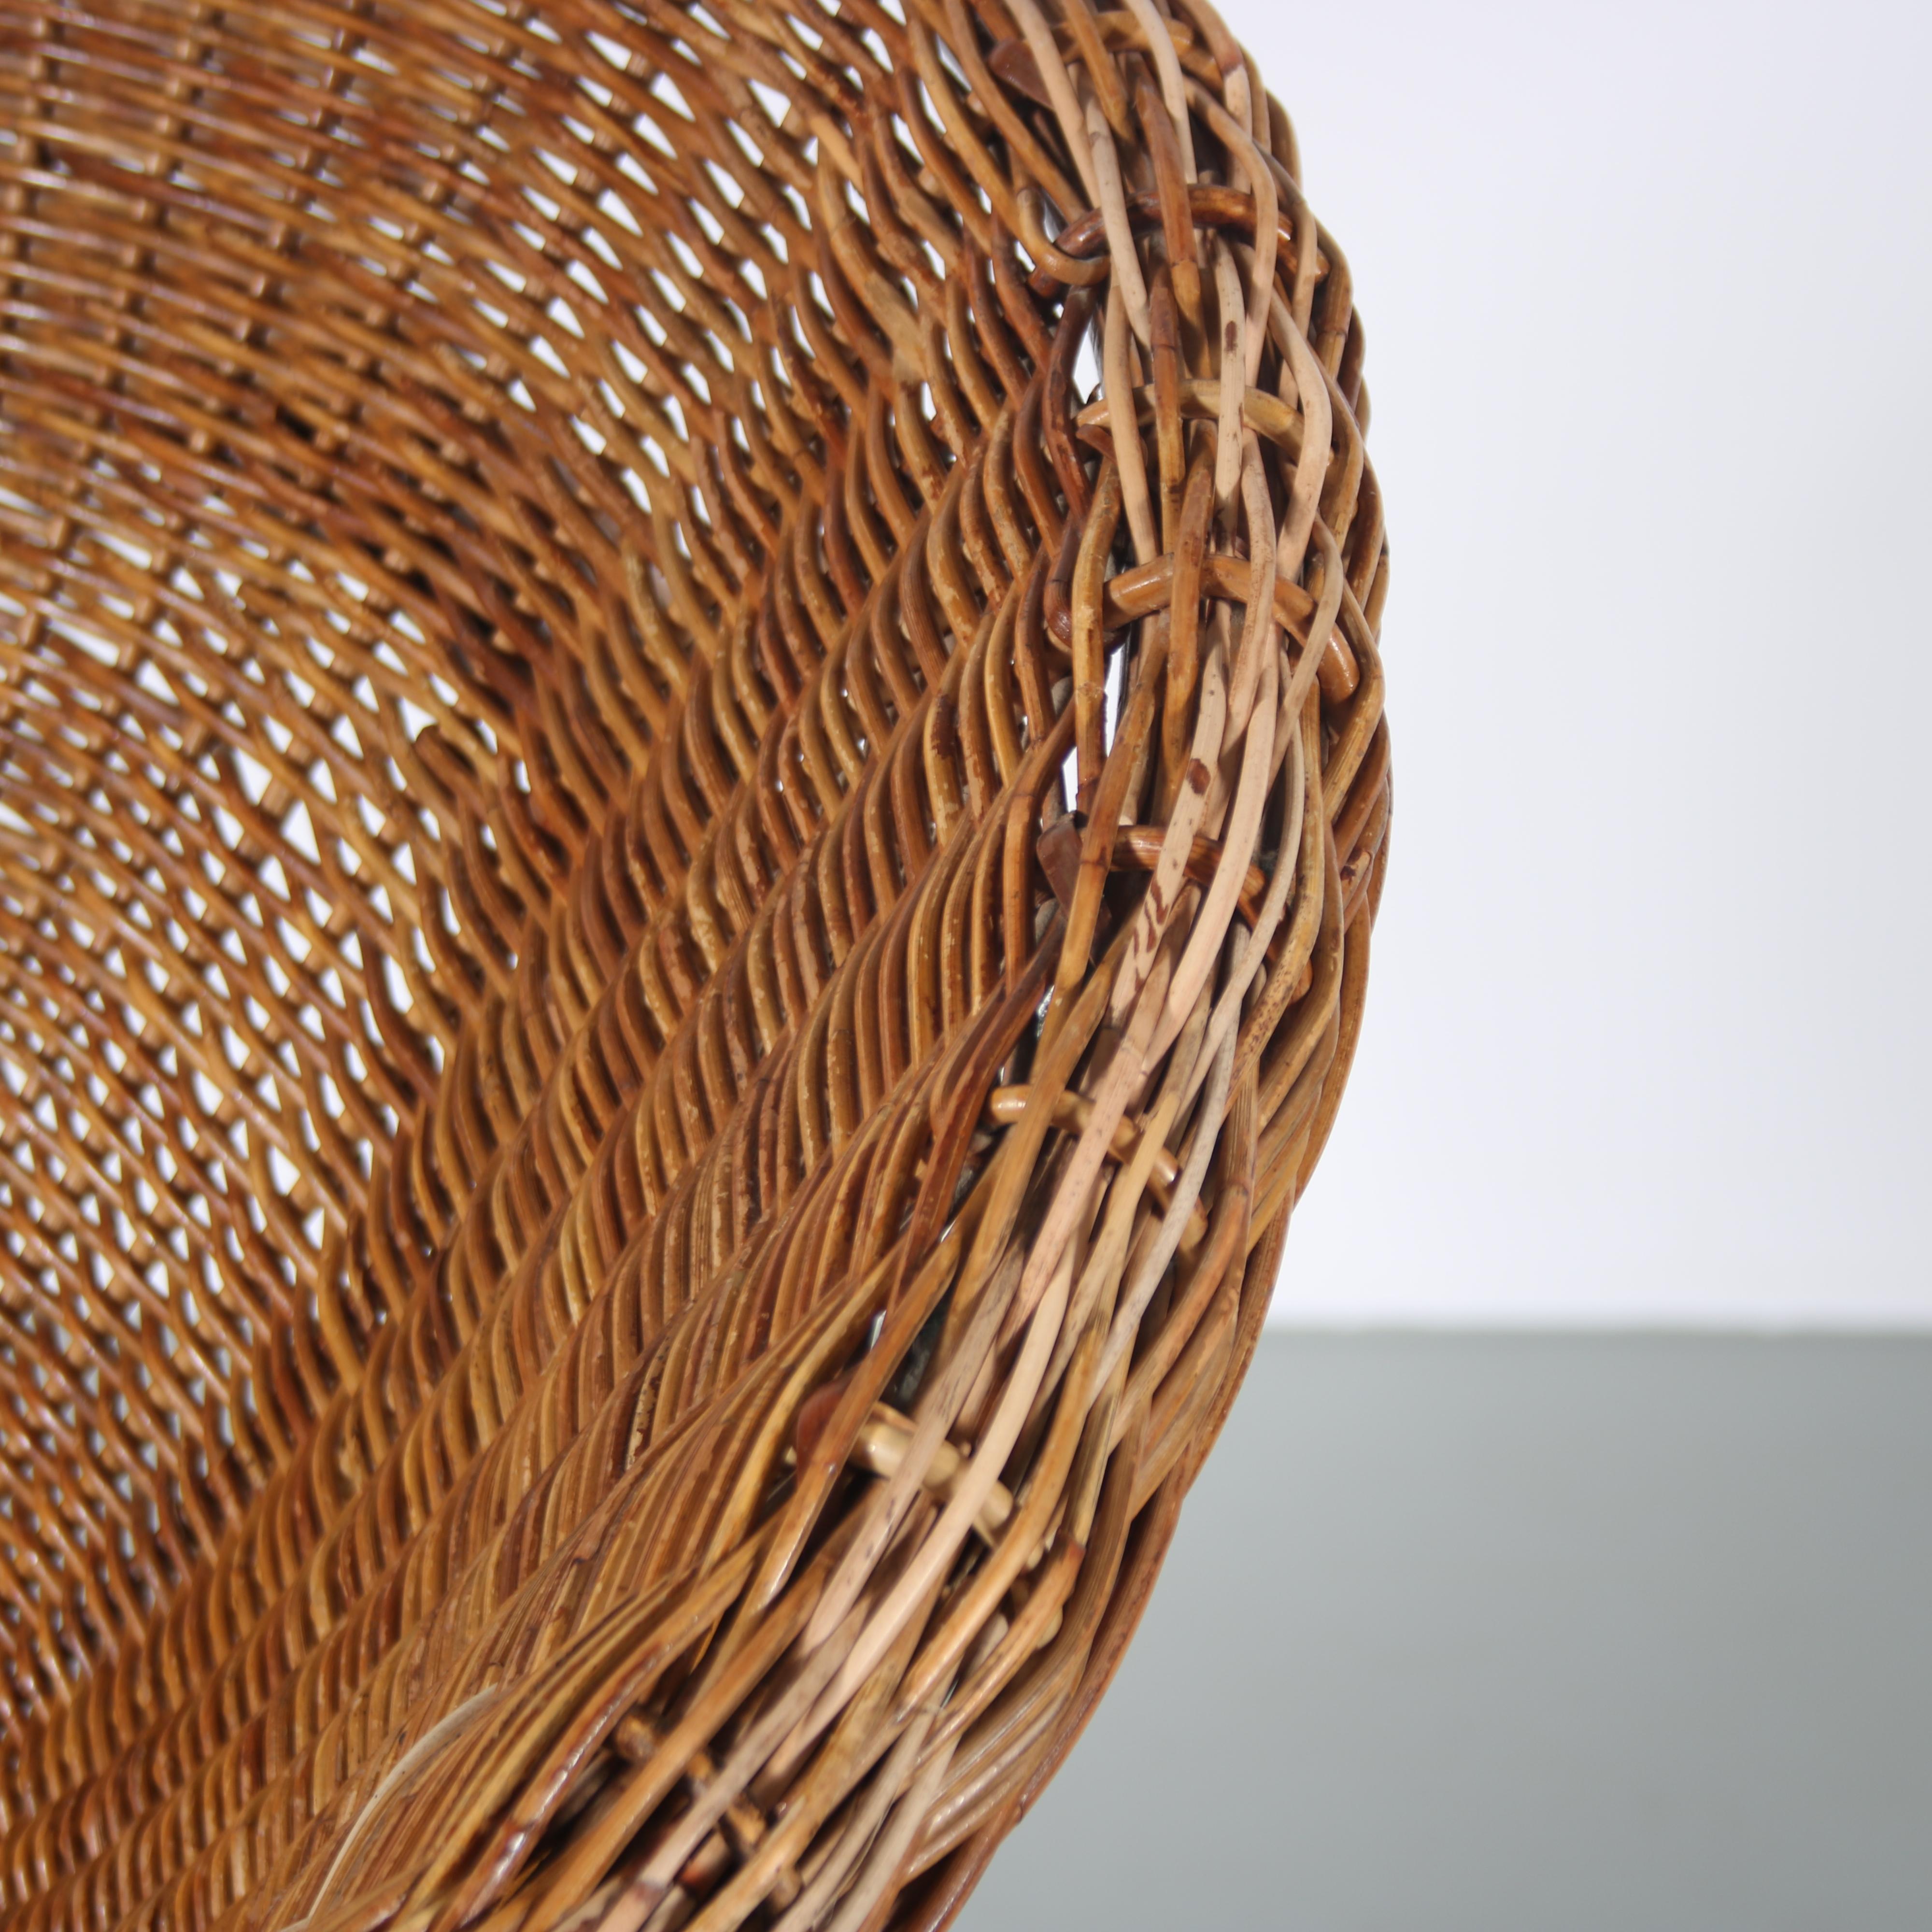 1950s Wicker chair by A. Bueno de Mesquita for Rohé, Netherlands 3